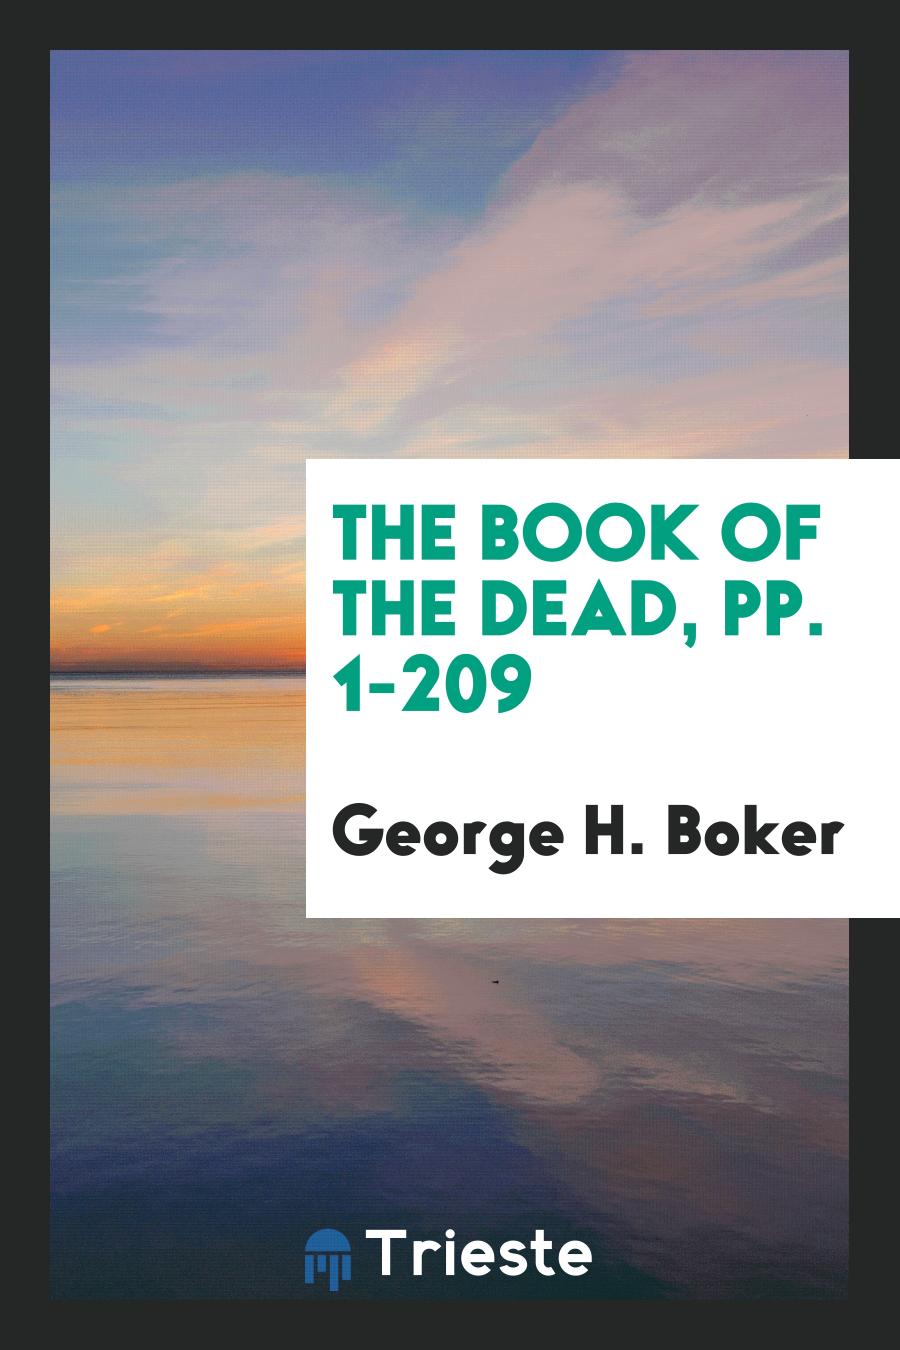 The Book of the Dead, pp. 1-209